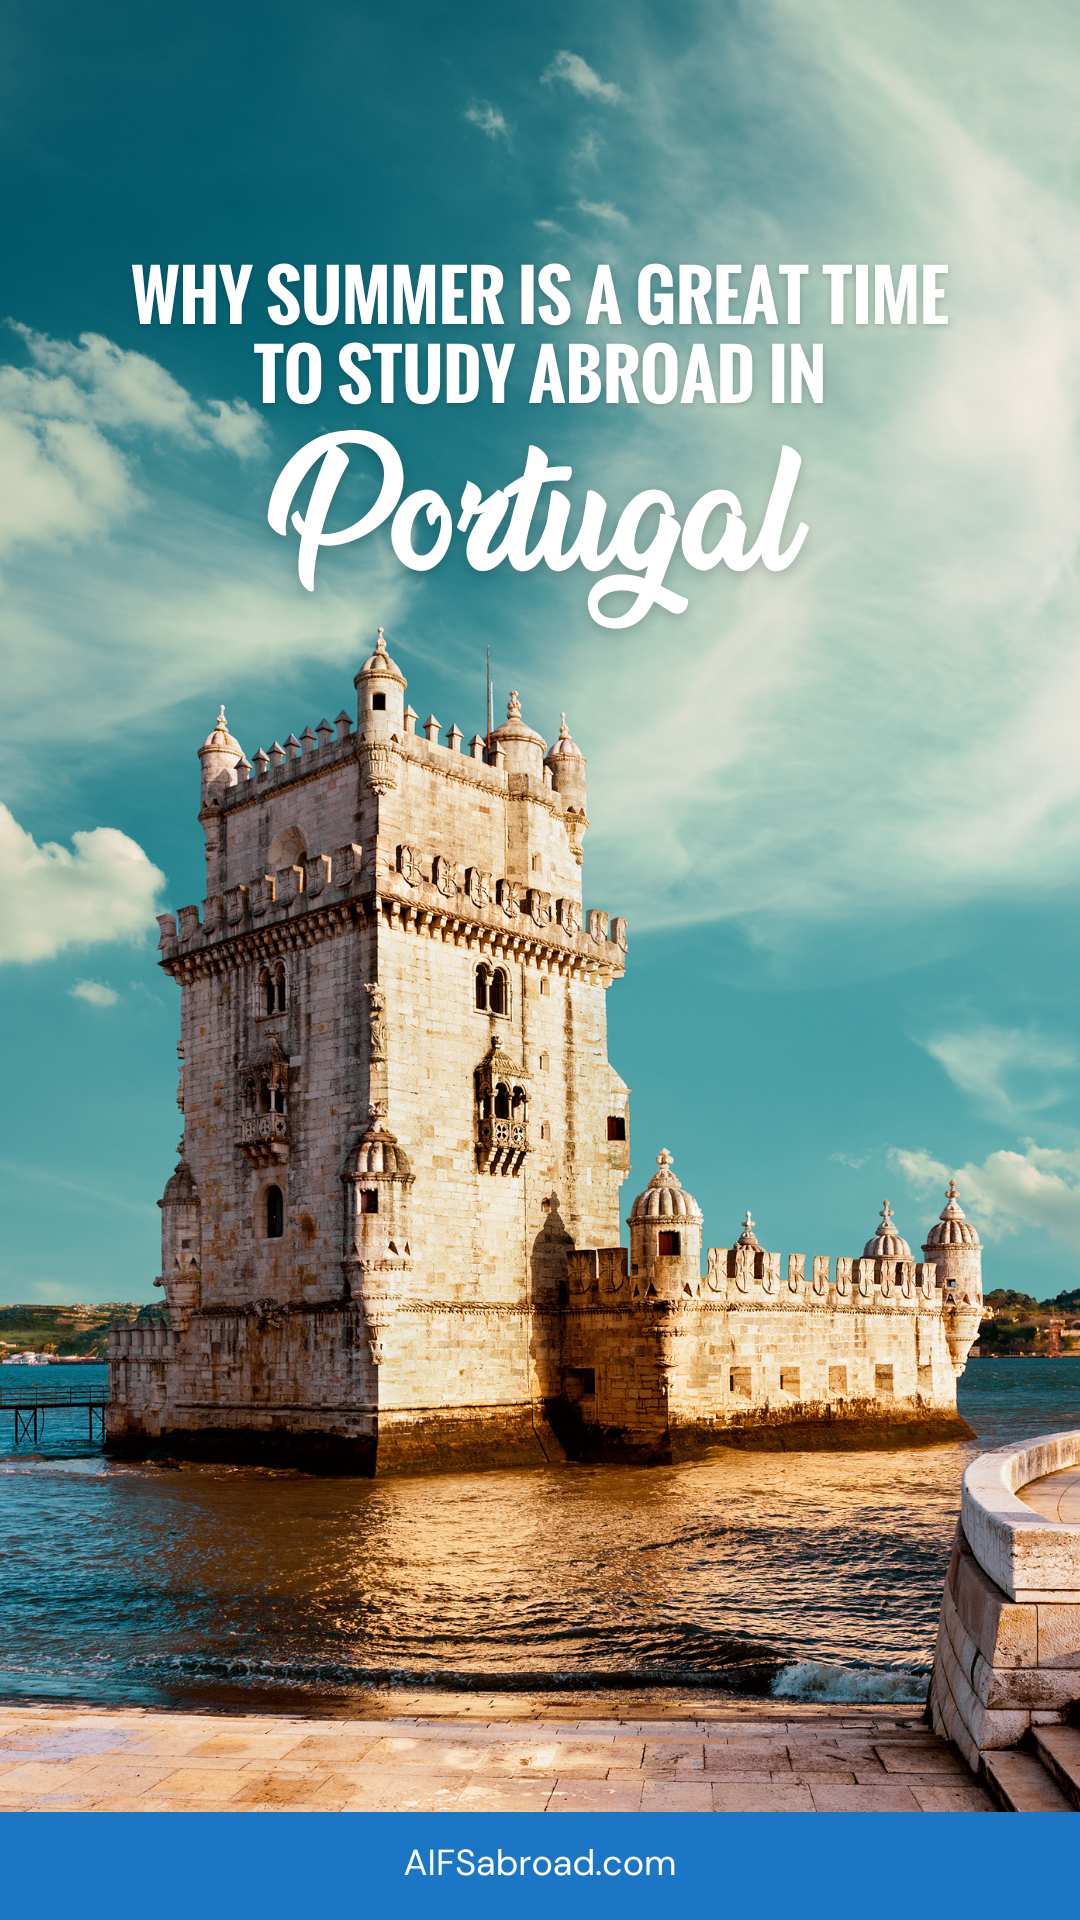 Pin image: Landmark in Lisbon with text overlay saying "Why summer is a great time to study abroad in Portugal"